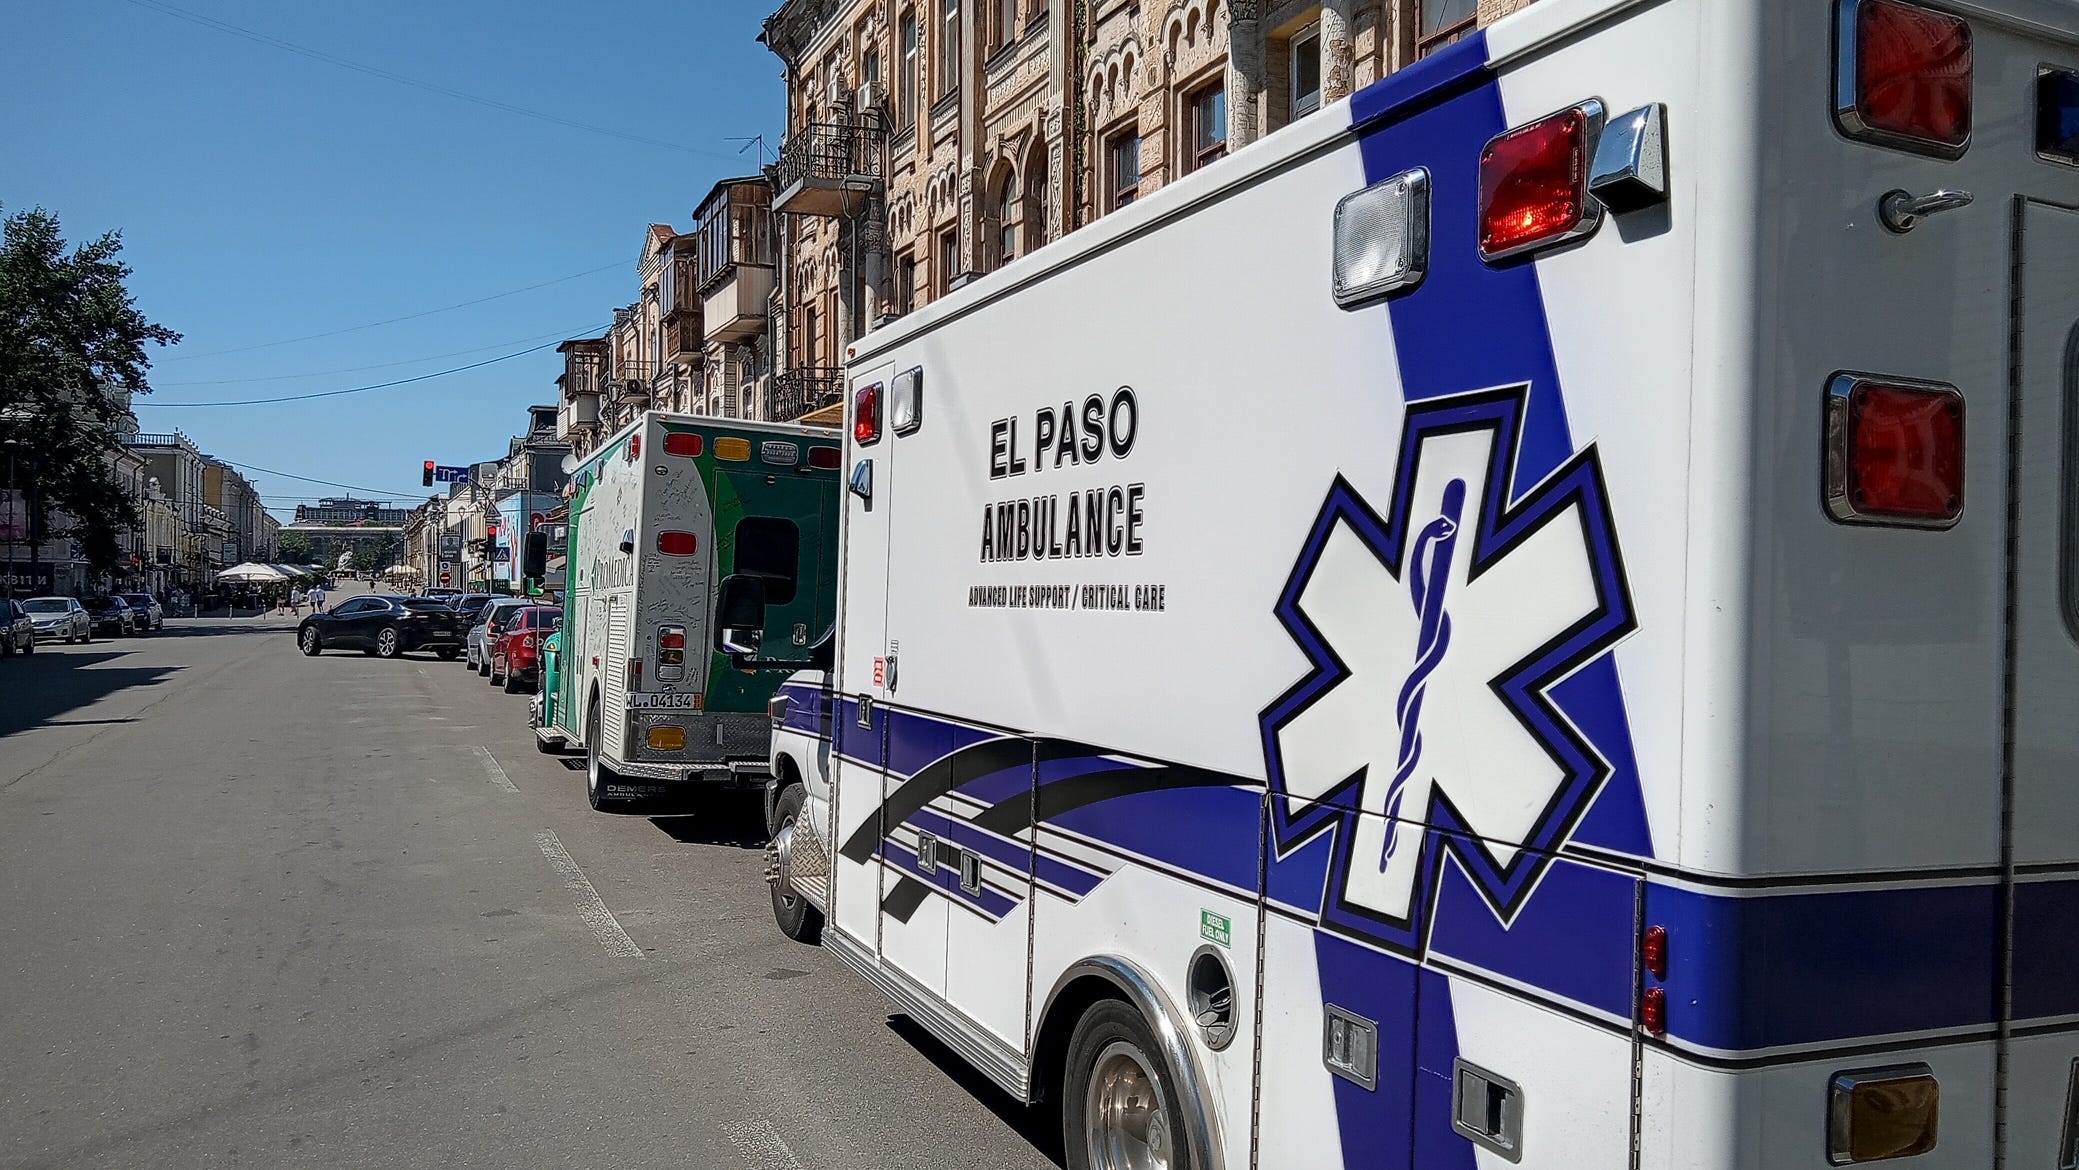  On the road again: Growing number of Illinois ambulances on the ground in Ukraine 